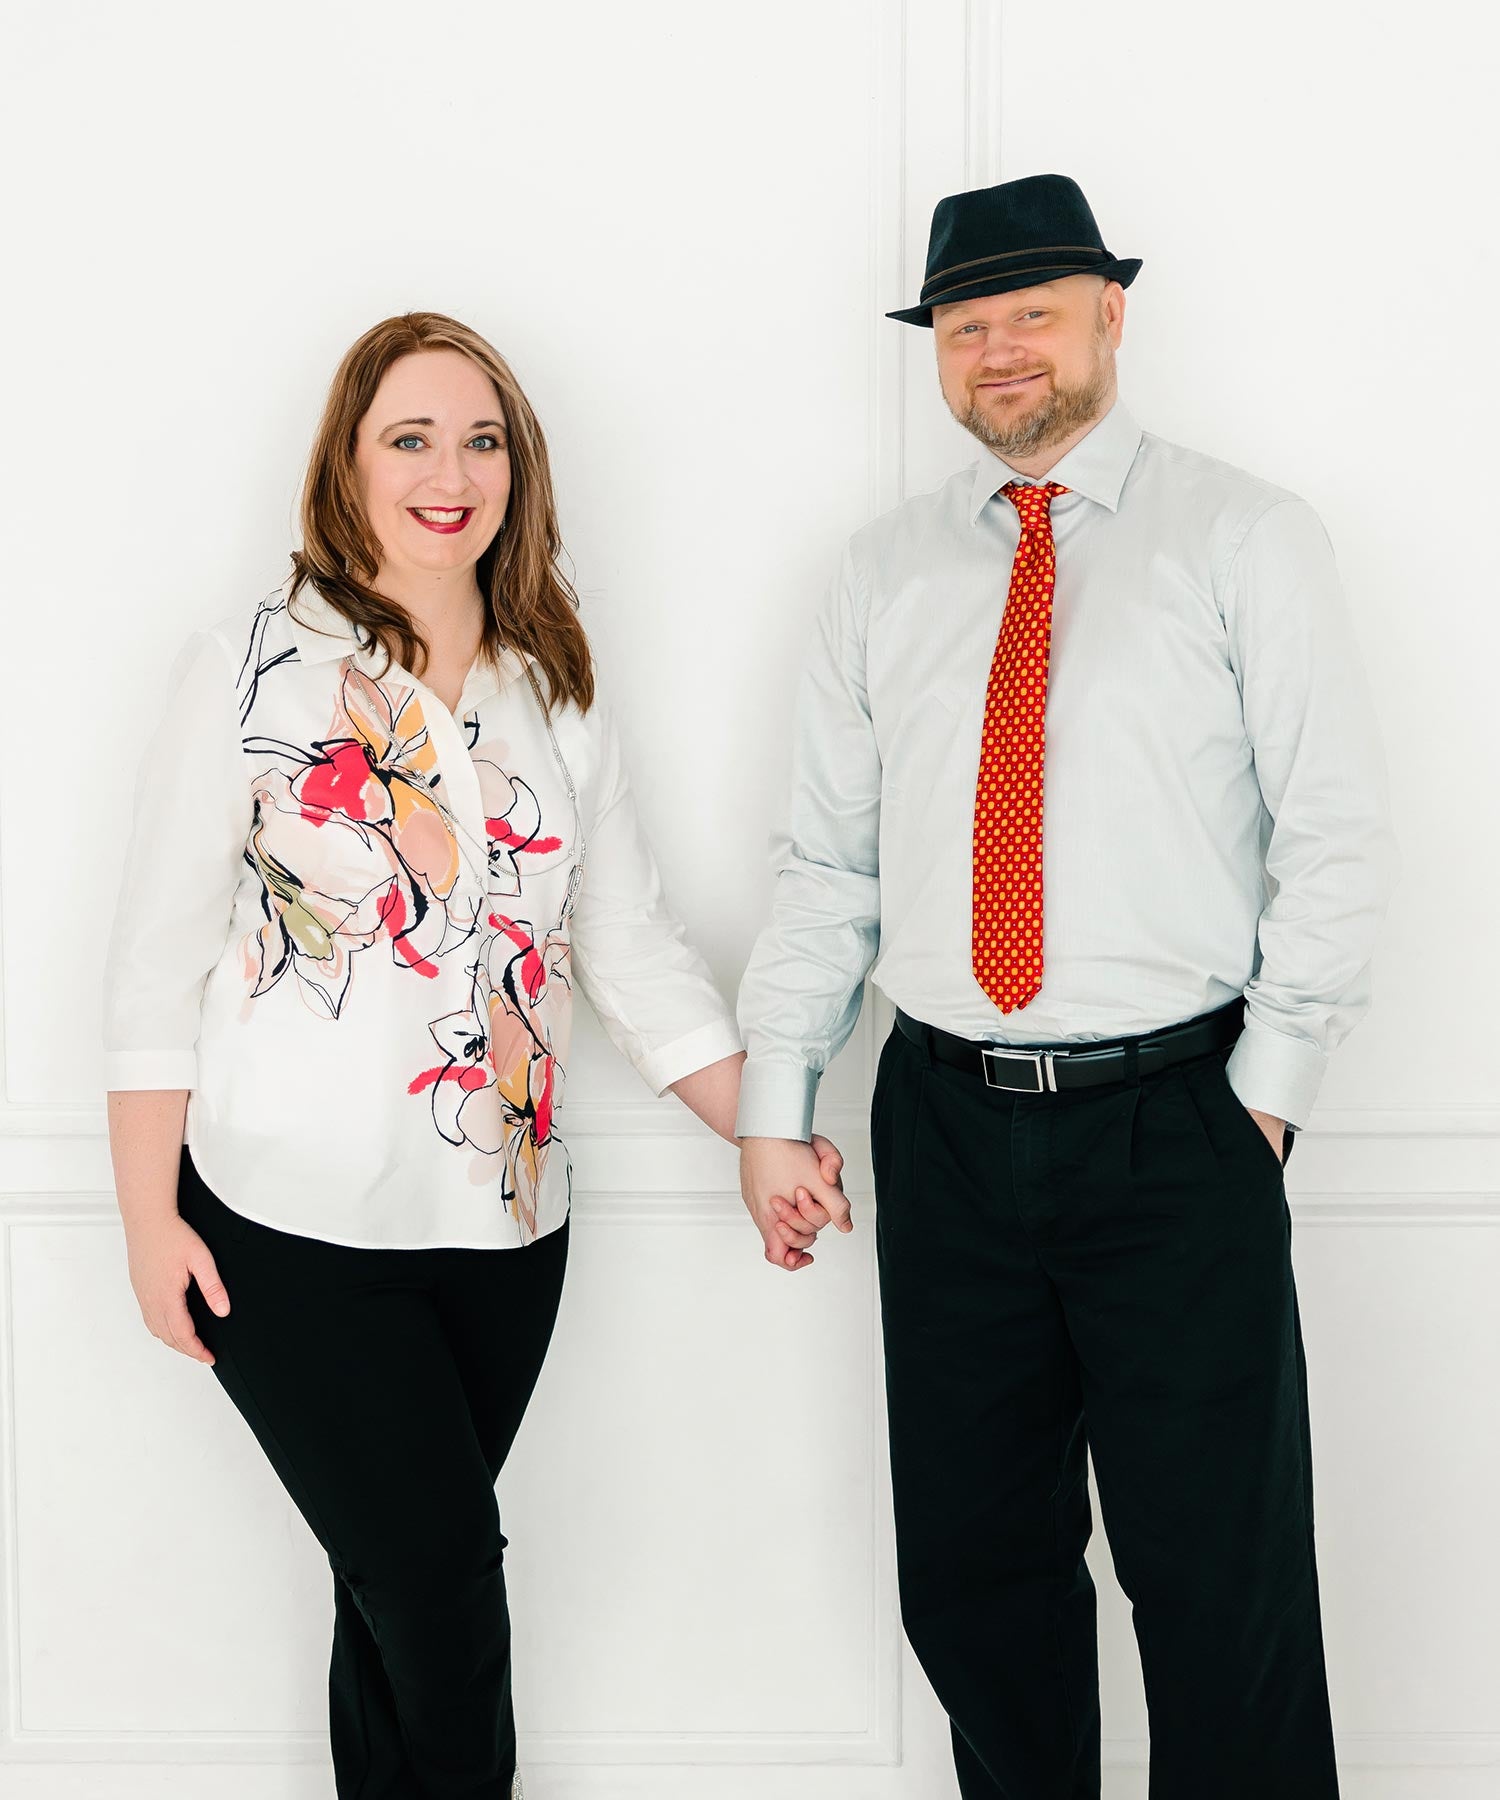 Forged Flare® founders Chris and Jen Street in press release photo for media kit, as seen in key publications.